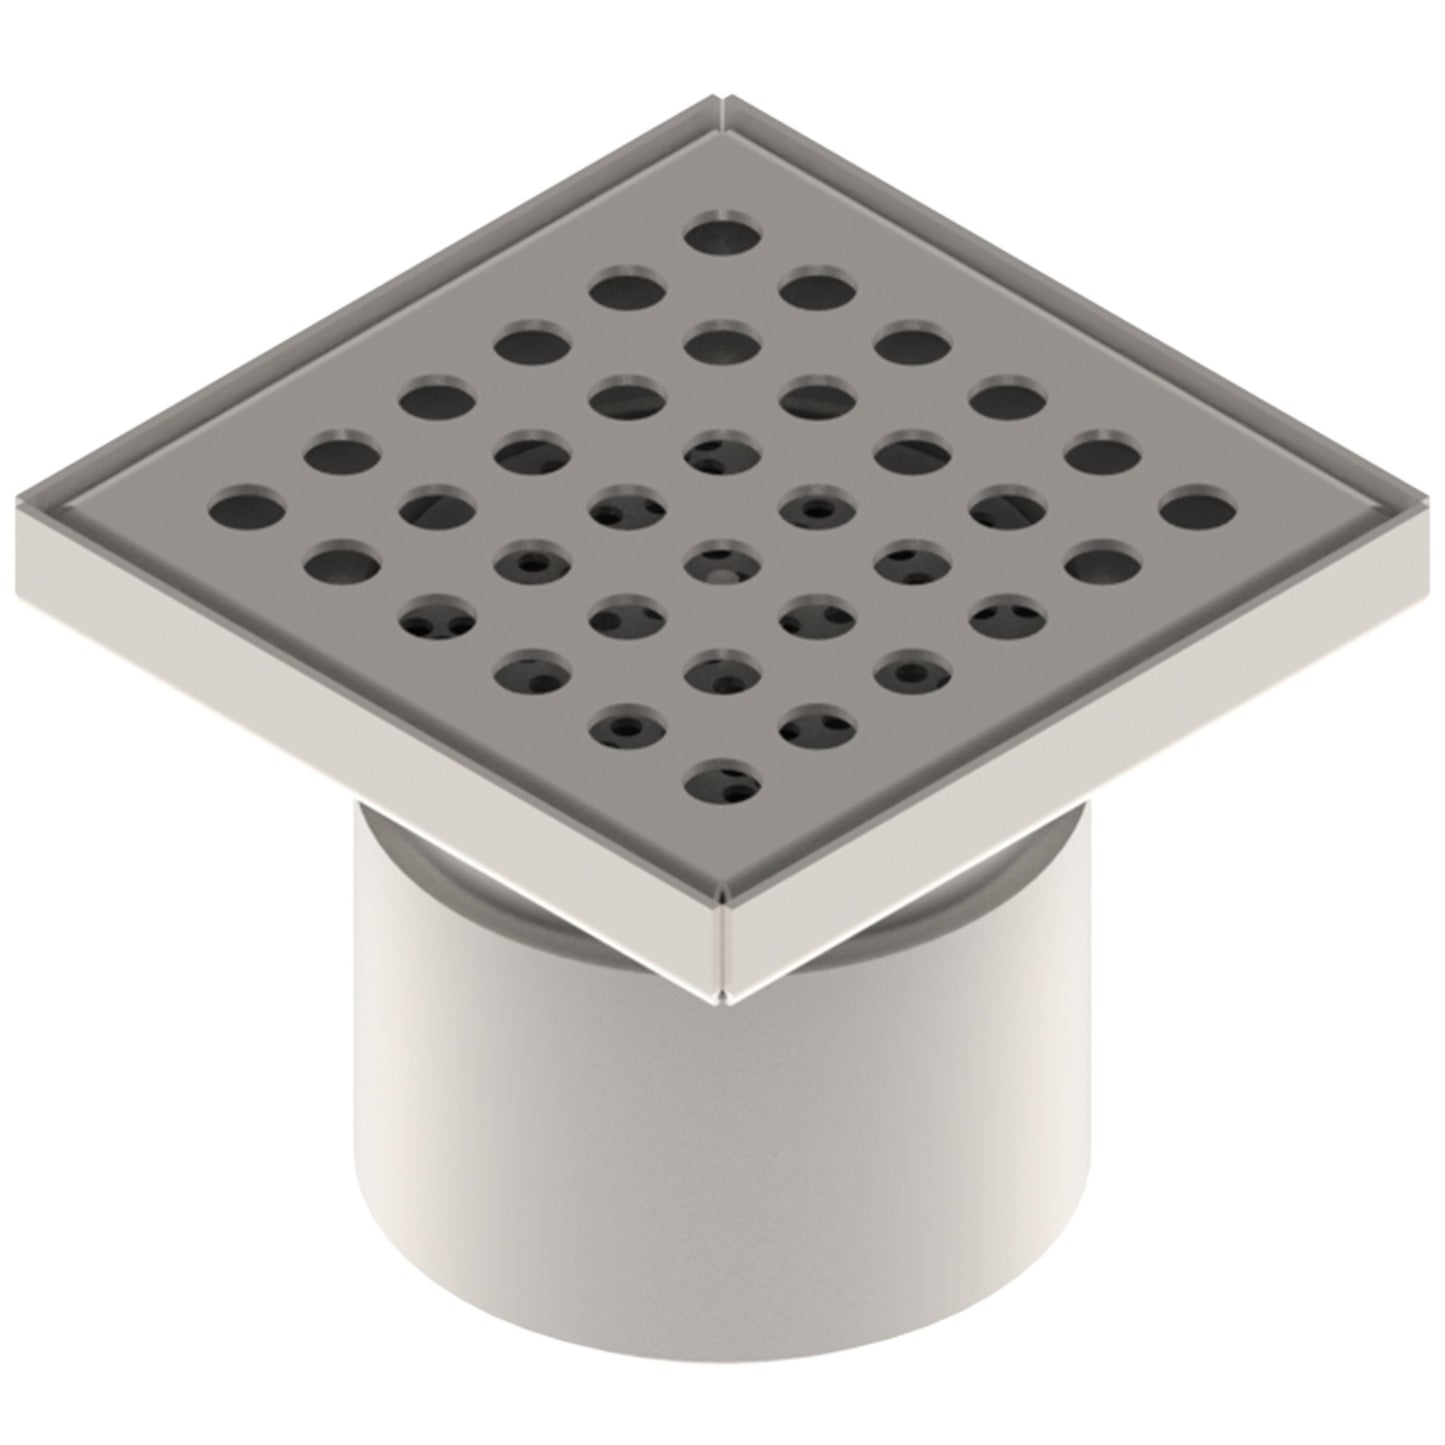 6" Stainless Steel Floor and Shower Drain